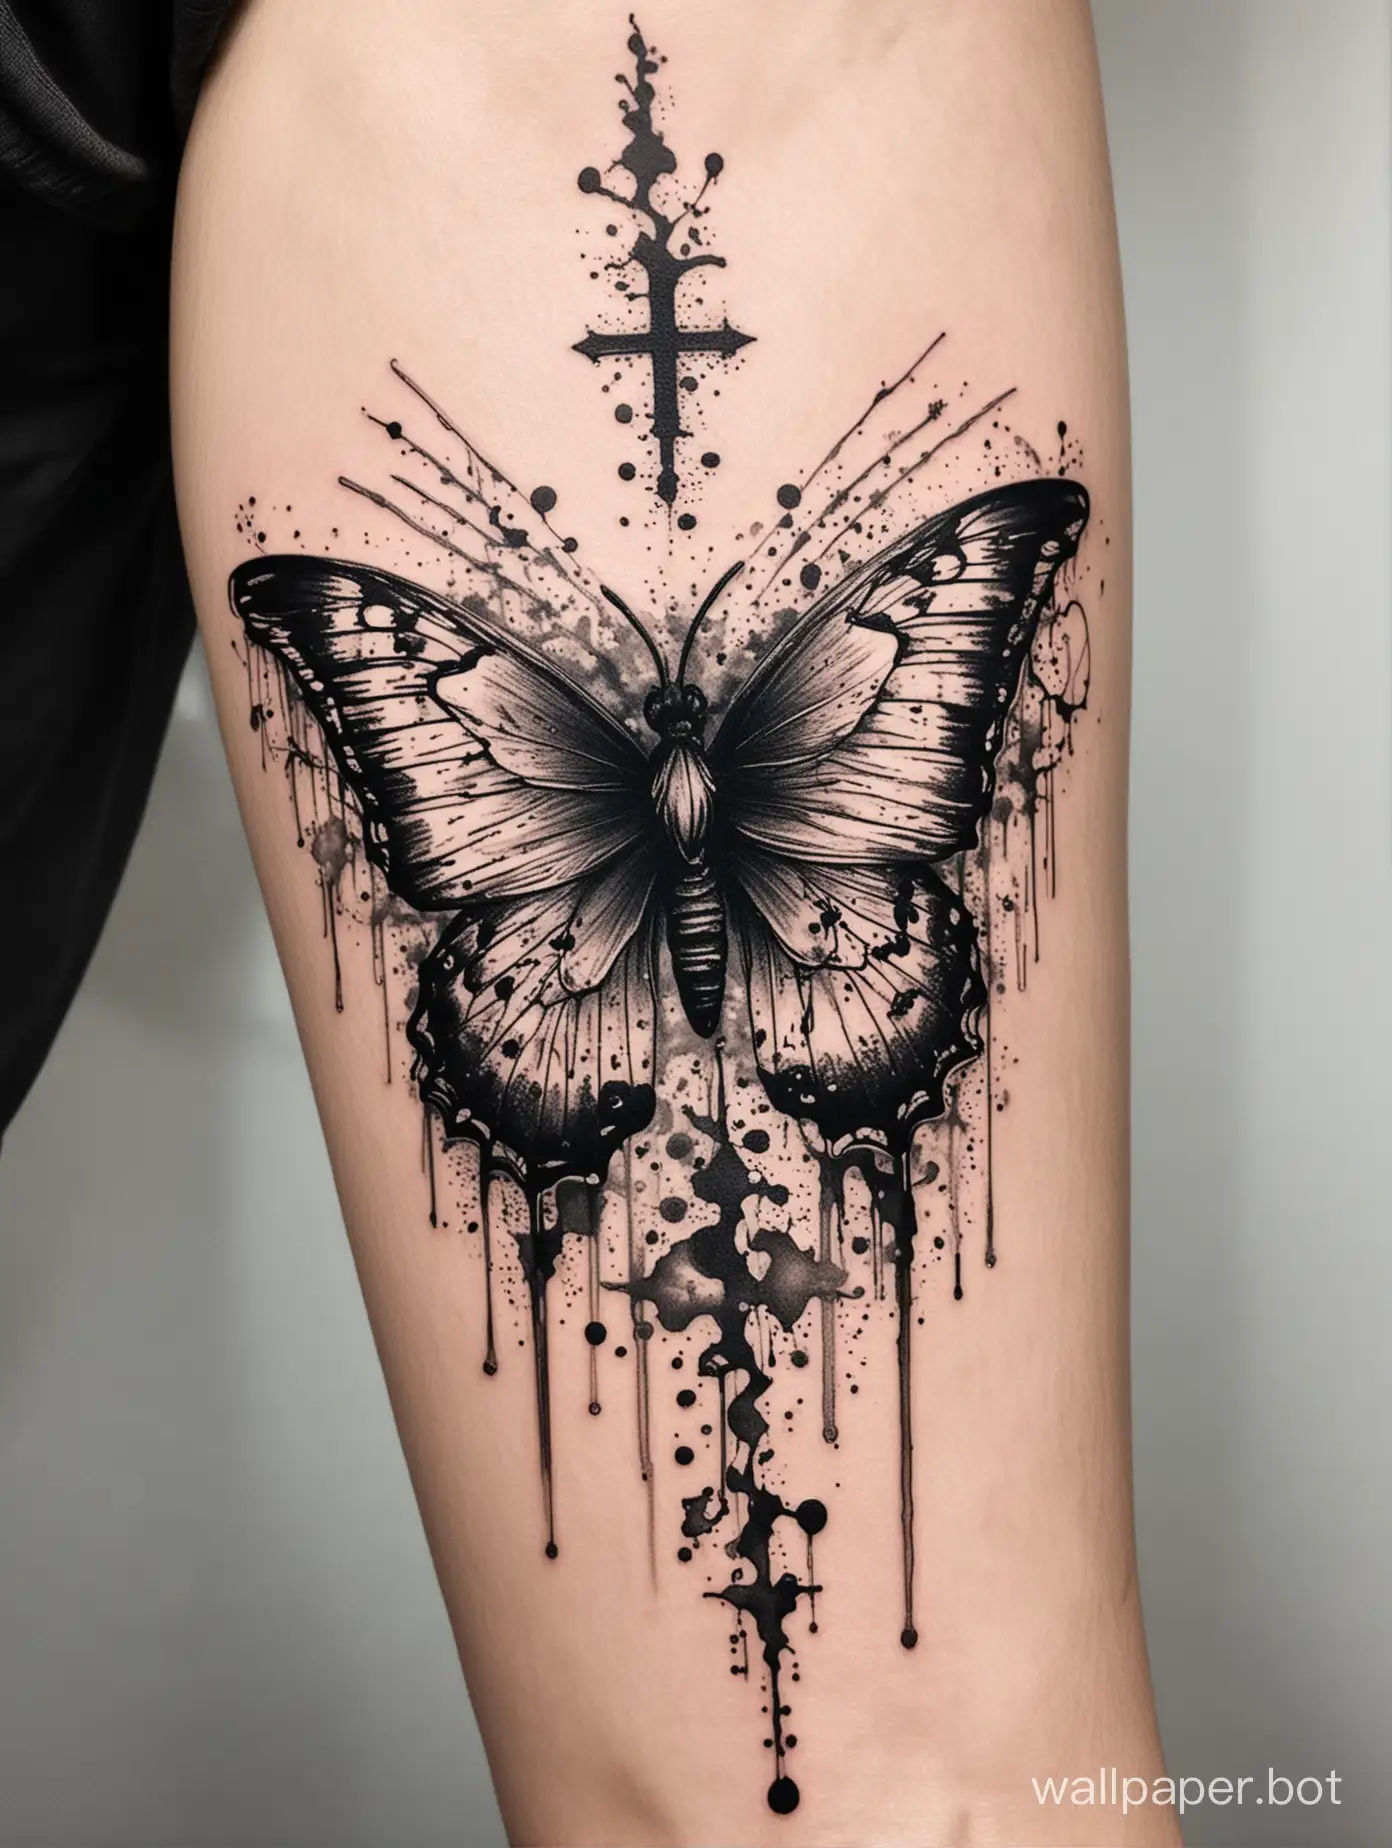 Butterfly-Tattoo-Design-with-Explosive-Blackwork-and-Organic-Lines